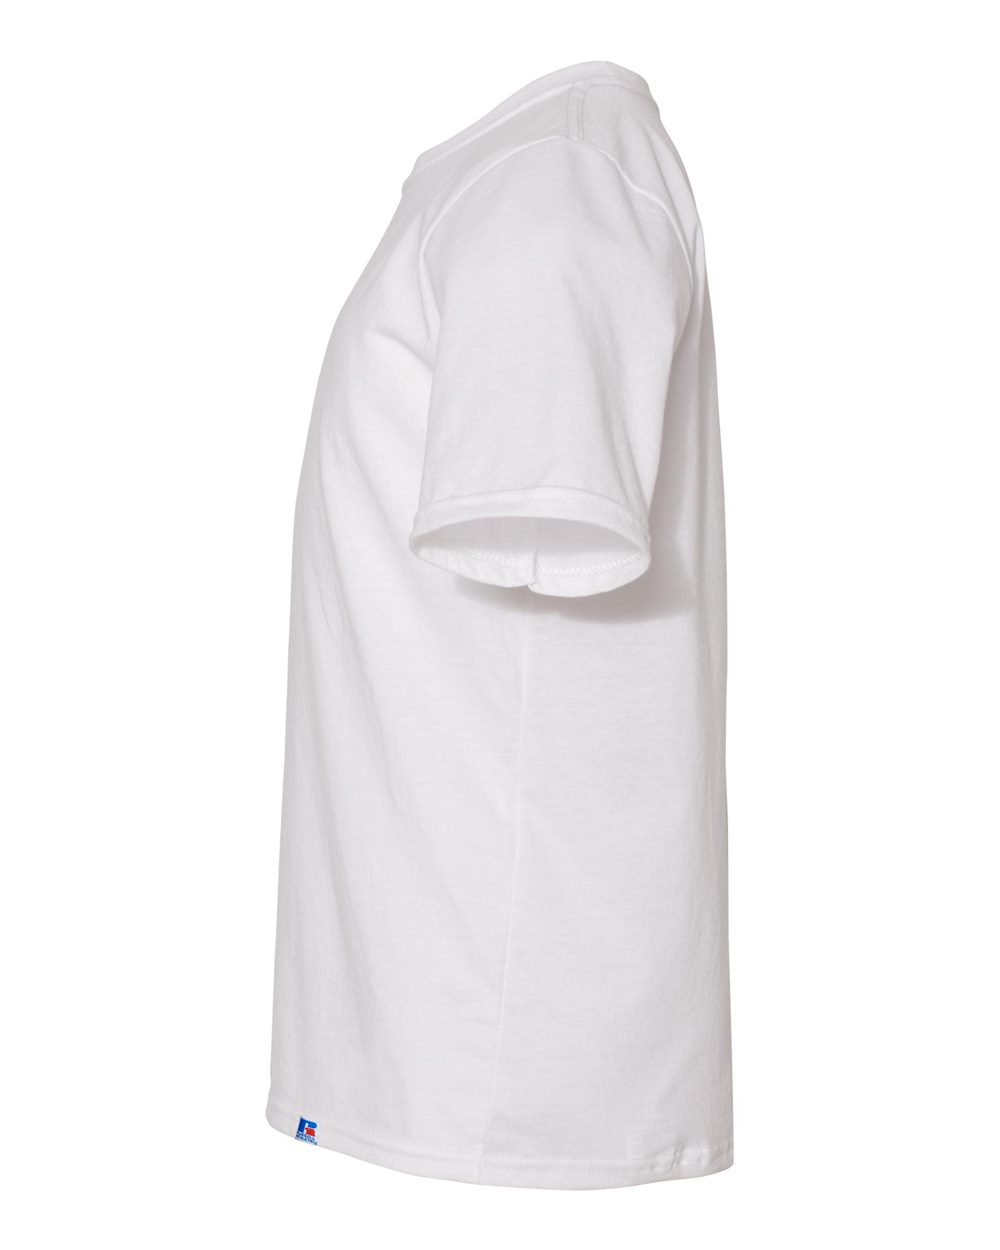 Russell Athletic Kids' Shirt - White